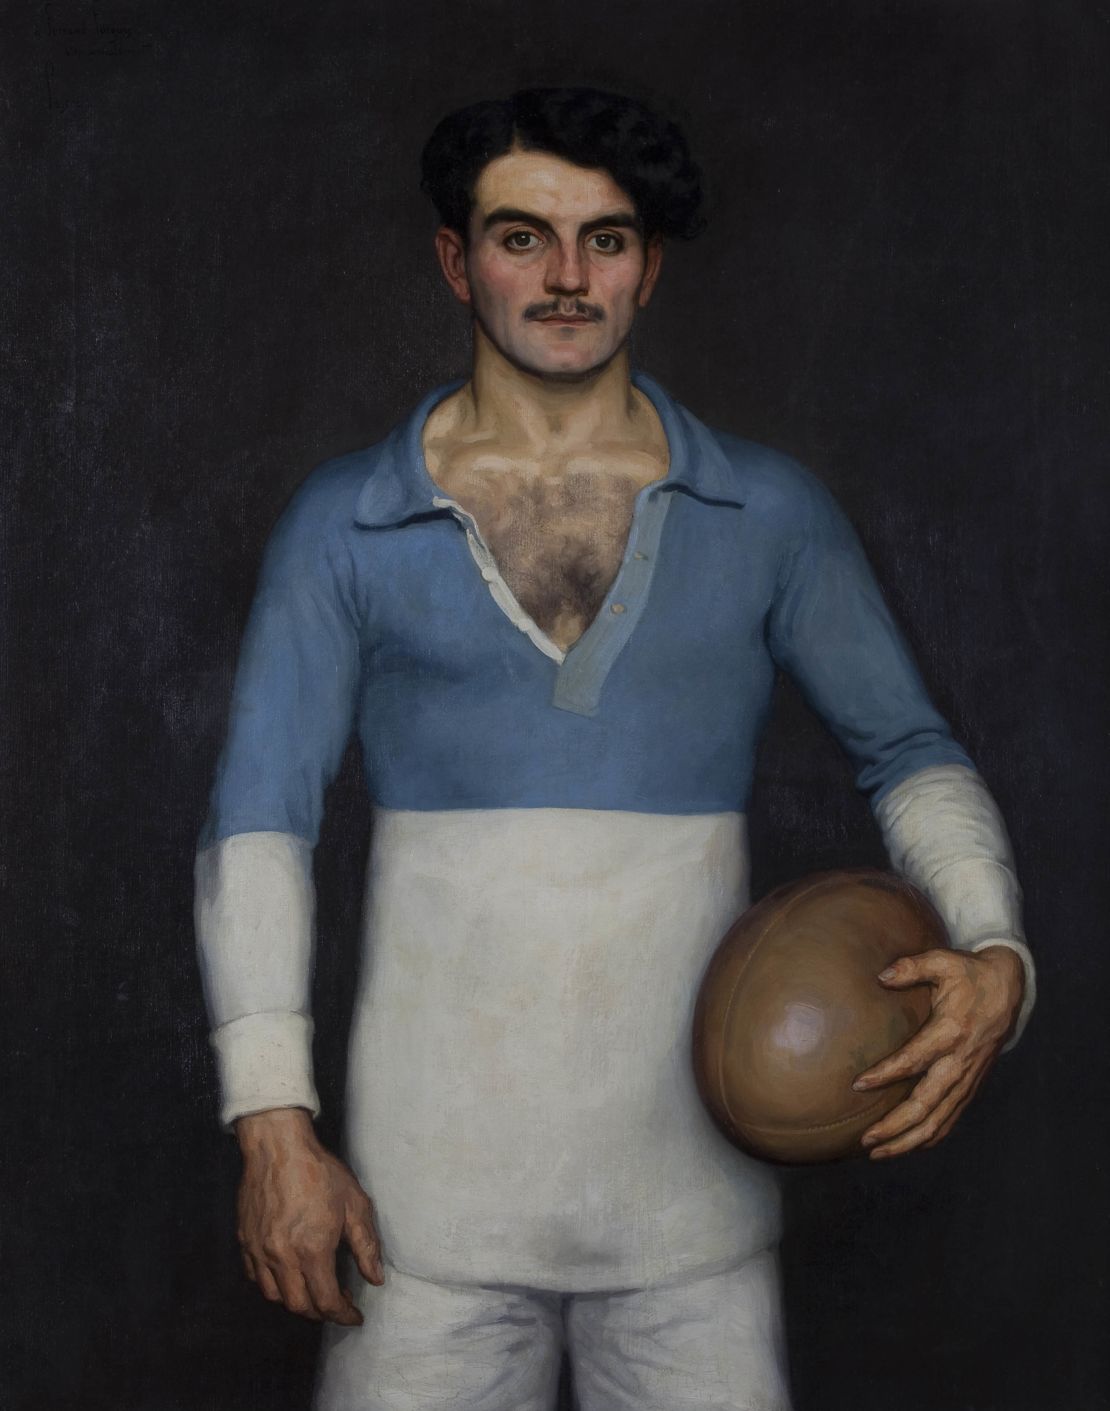 A portrait of Fernand Forgues, captain of the Aviron Bayonnais, painted by Eugene Pascau in 1912.